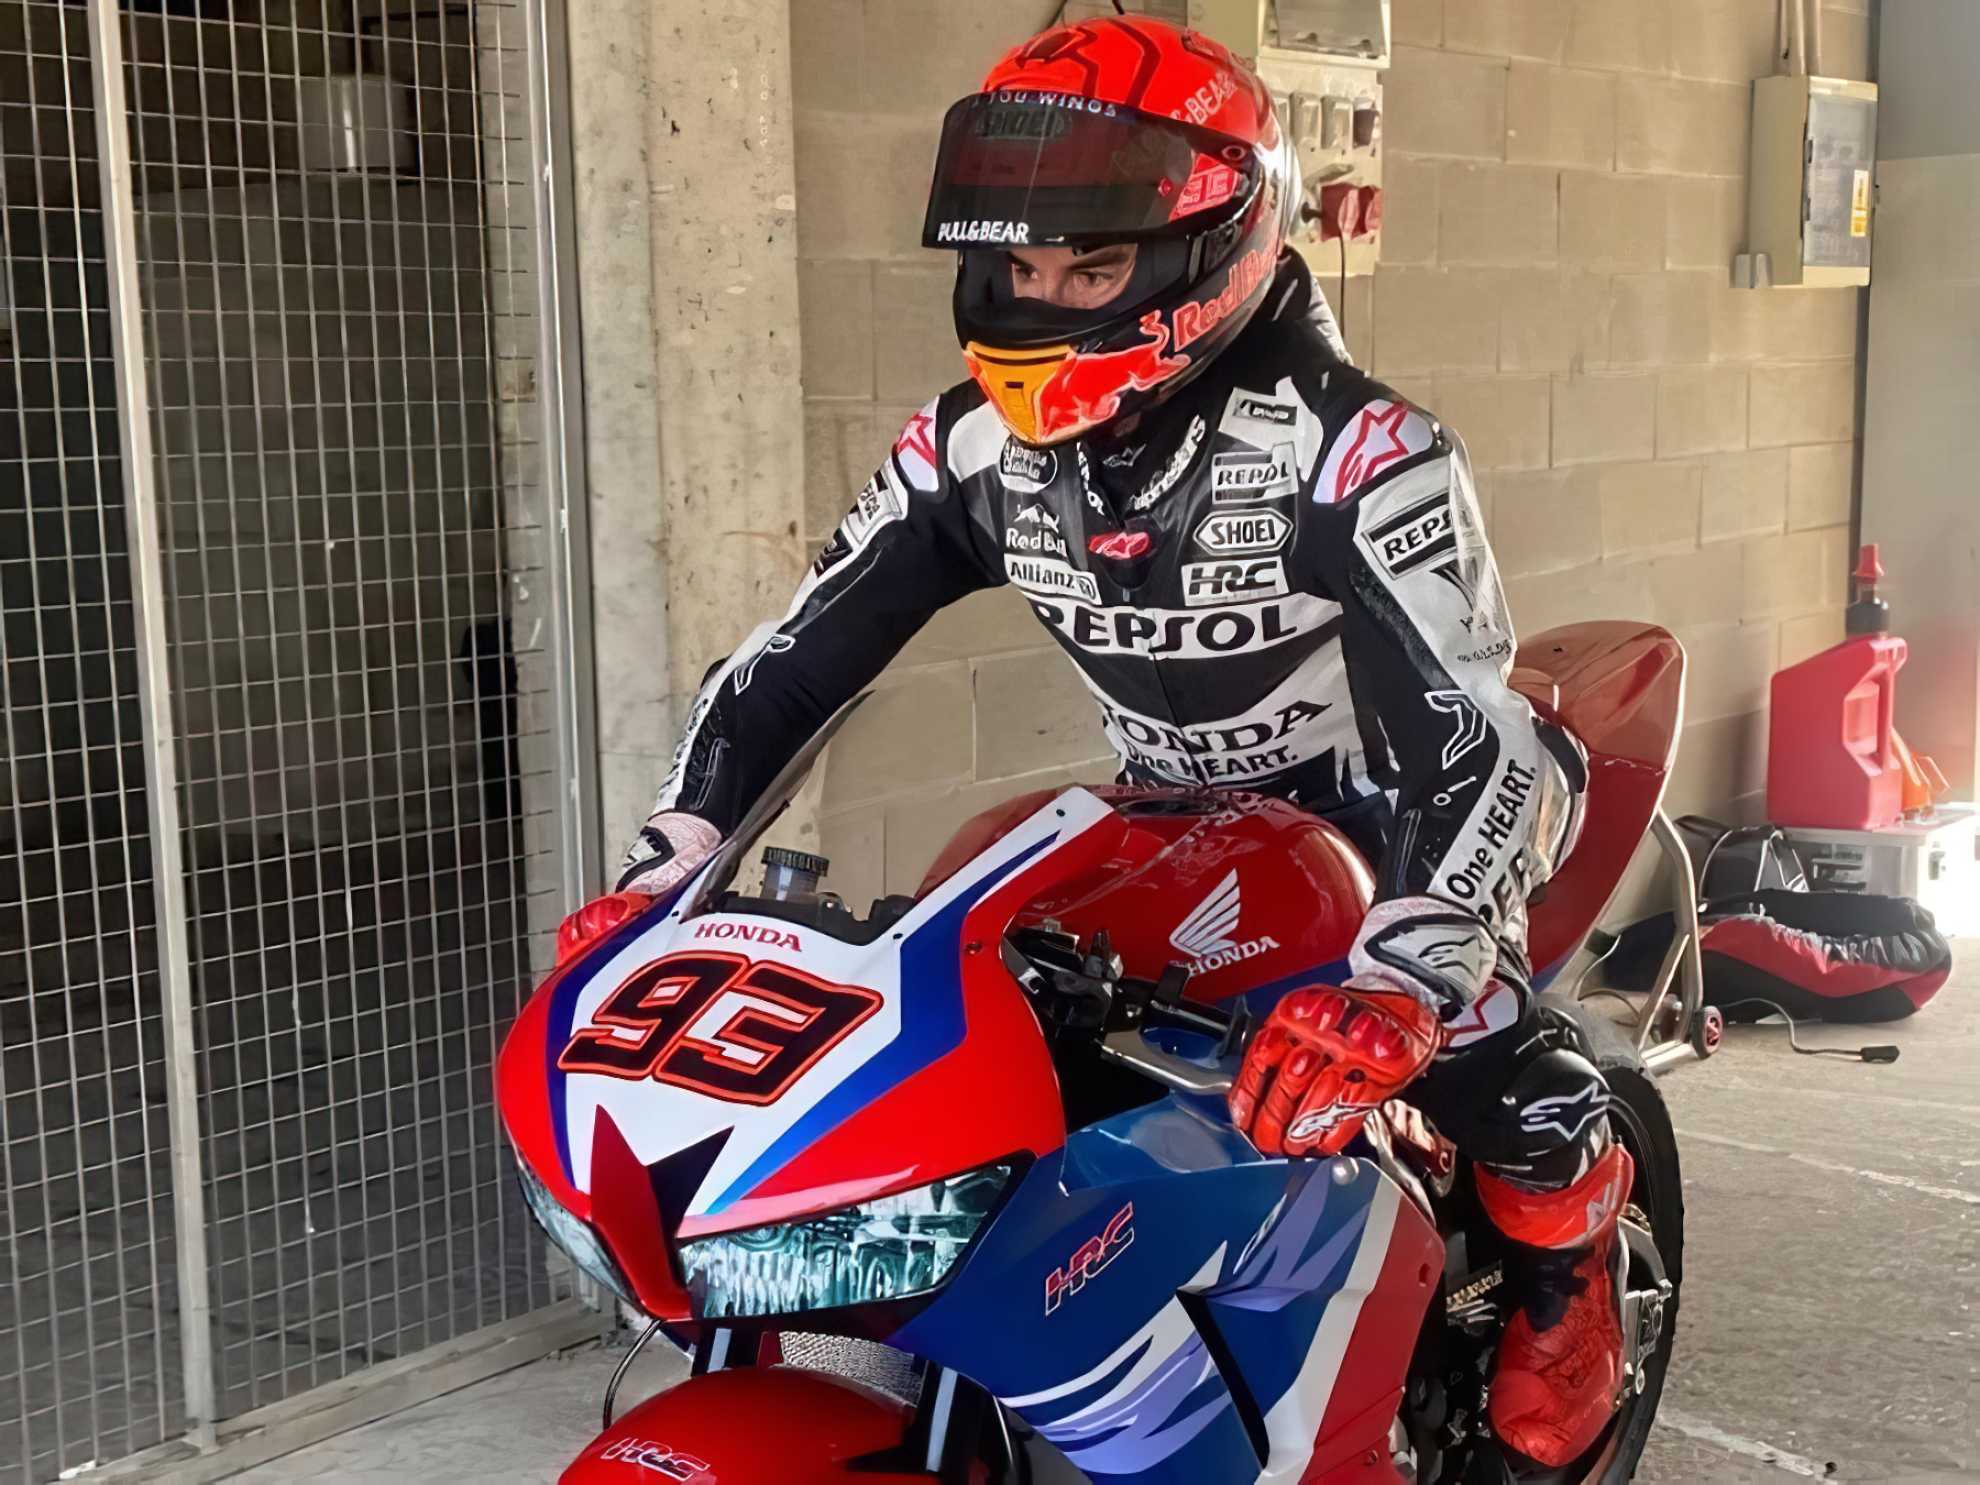 Marquez back on the bike - Motorcycles.News